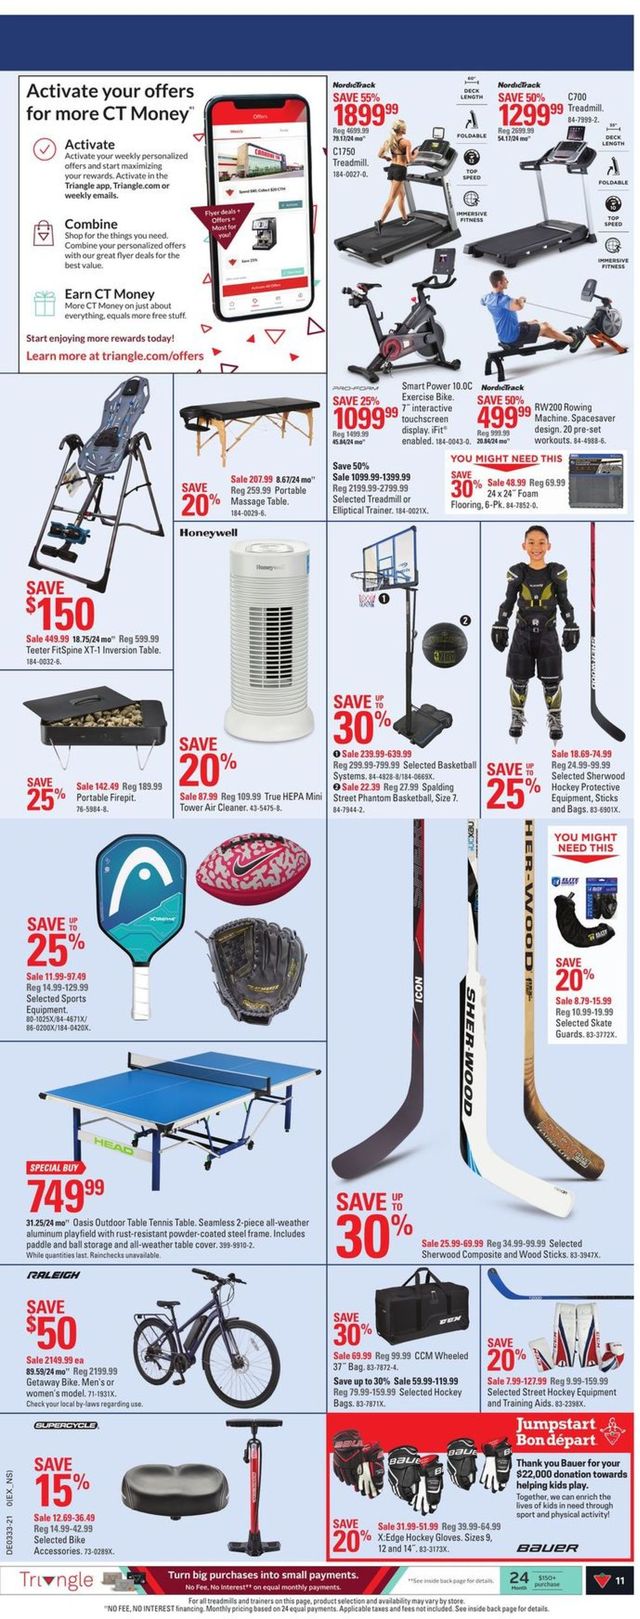 Canadian Tire Flyer from 08/12/2021